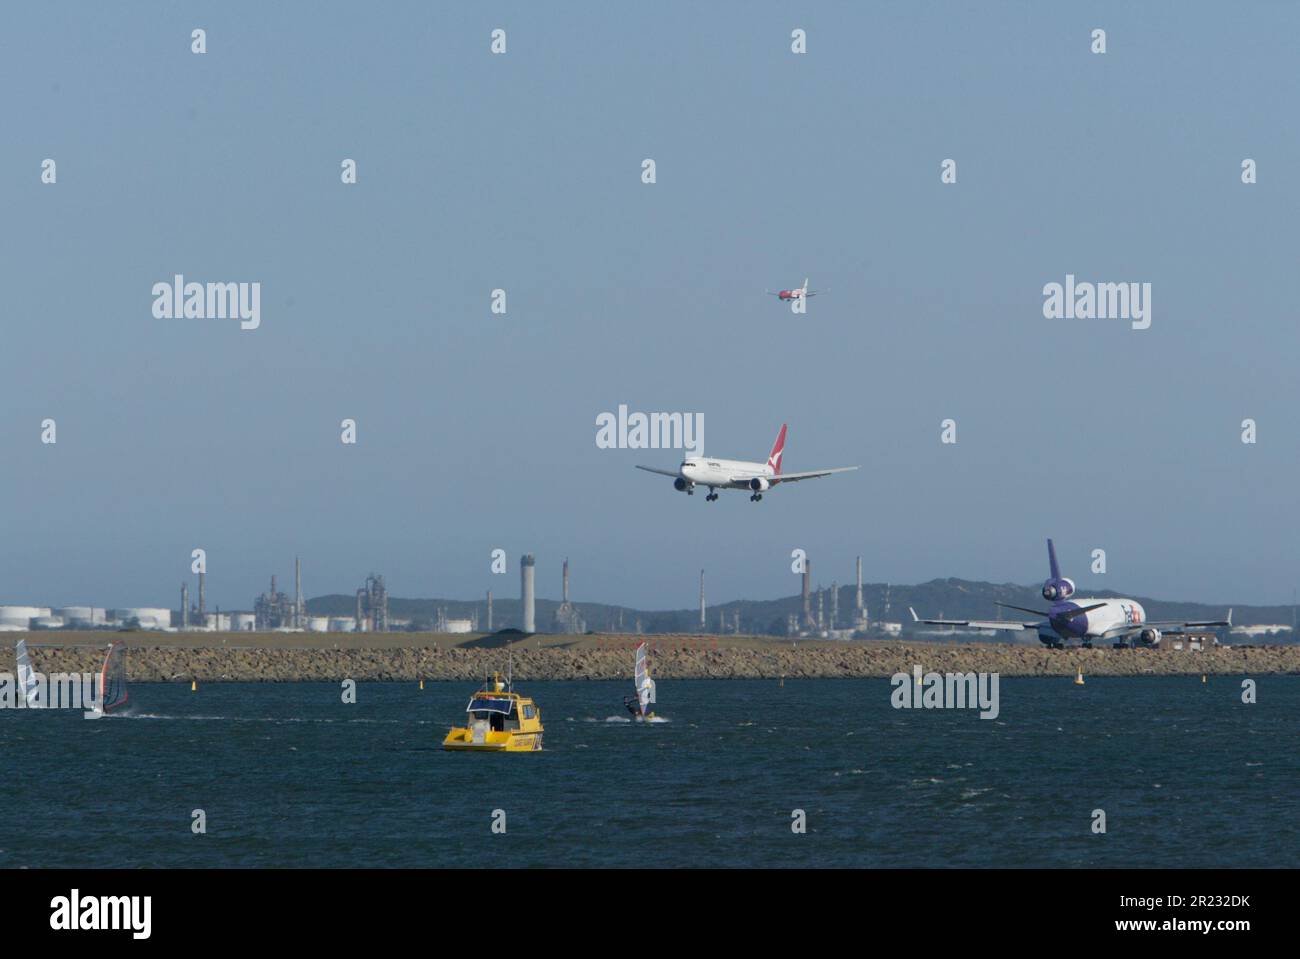 Aircraft and aircraft movements at Sydney (Kingsford Smith) Airport on Botany Bay in Sydney, Australia. Stock Photo